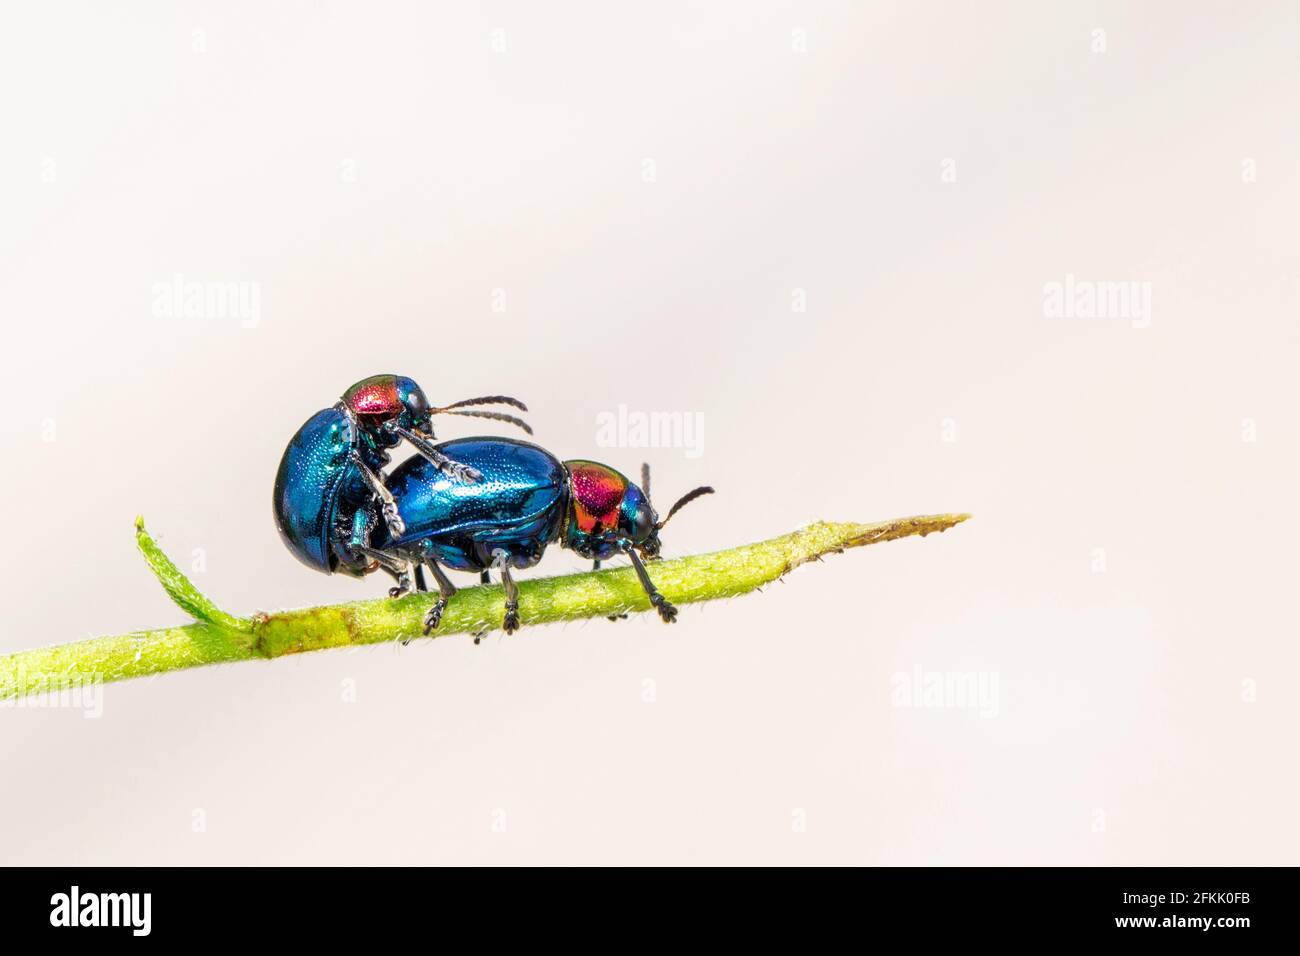 Image of blue milkweed beetle it has blue wings and a red head couple make love on a natural background. Insect. Animal. Stock Photo